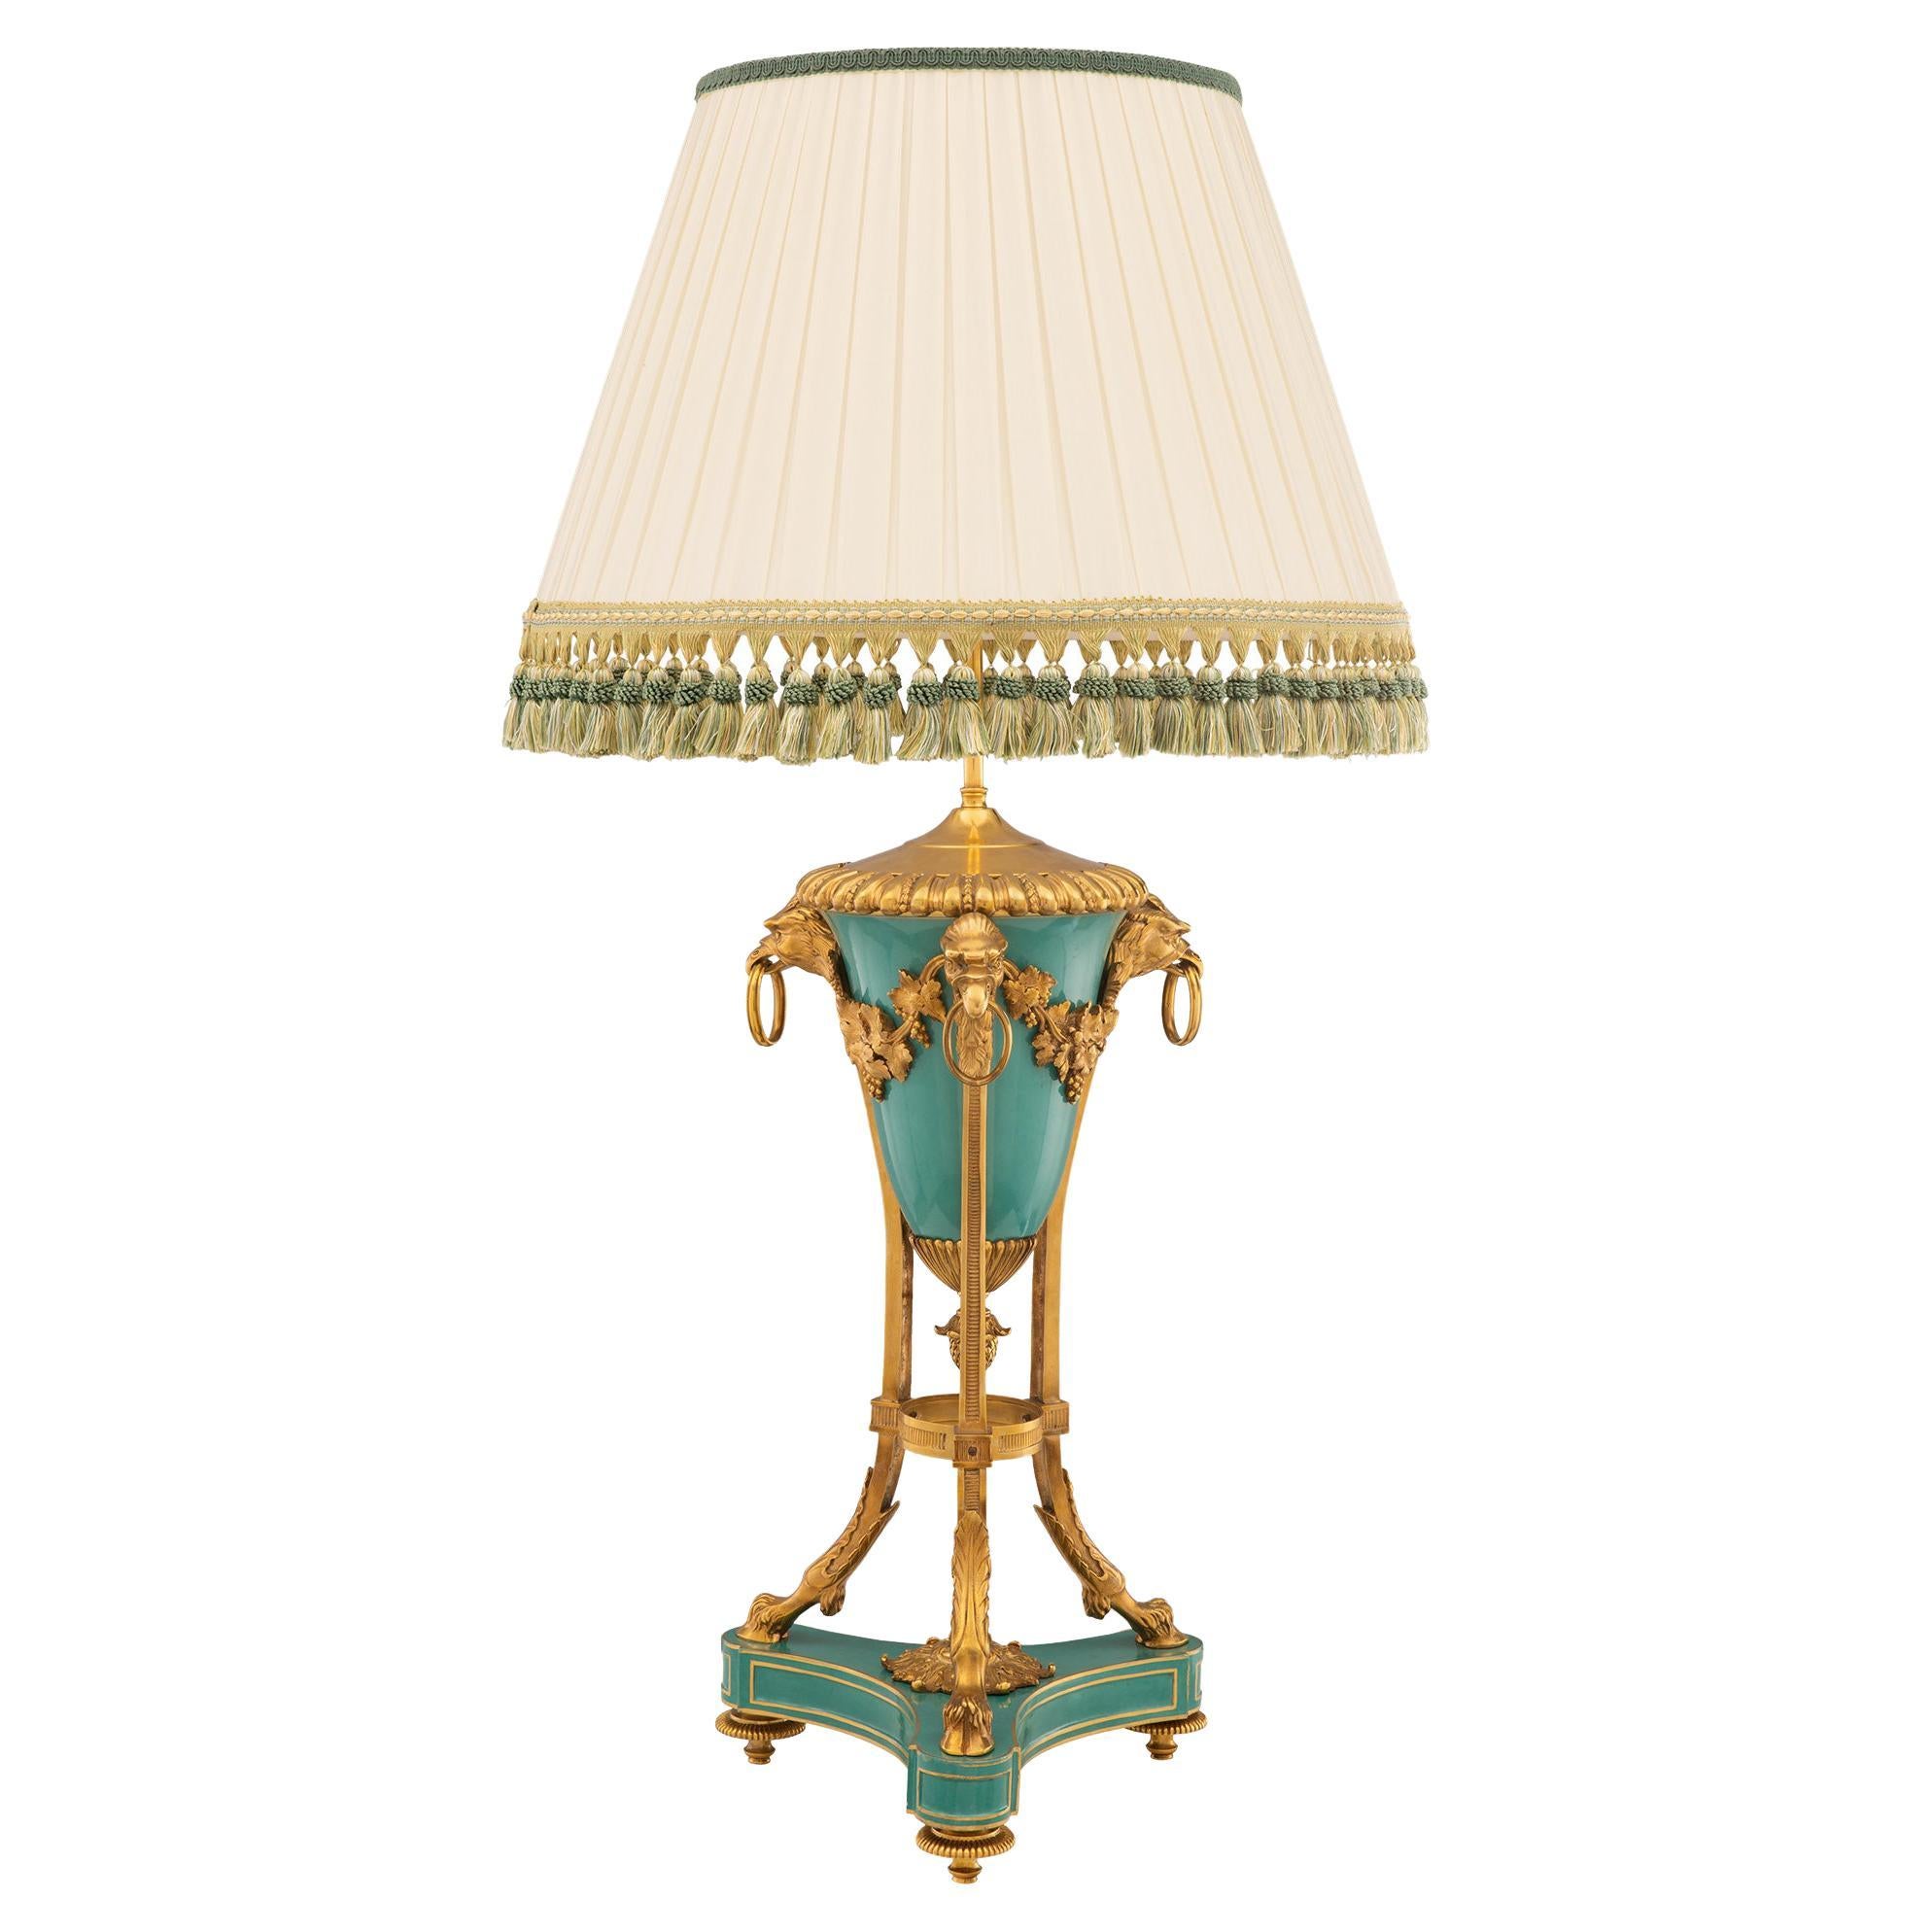 French 19th Century Louis XVI Style Ormolu and Porcelain Lamp, Signed by Sèvres For Sale